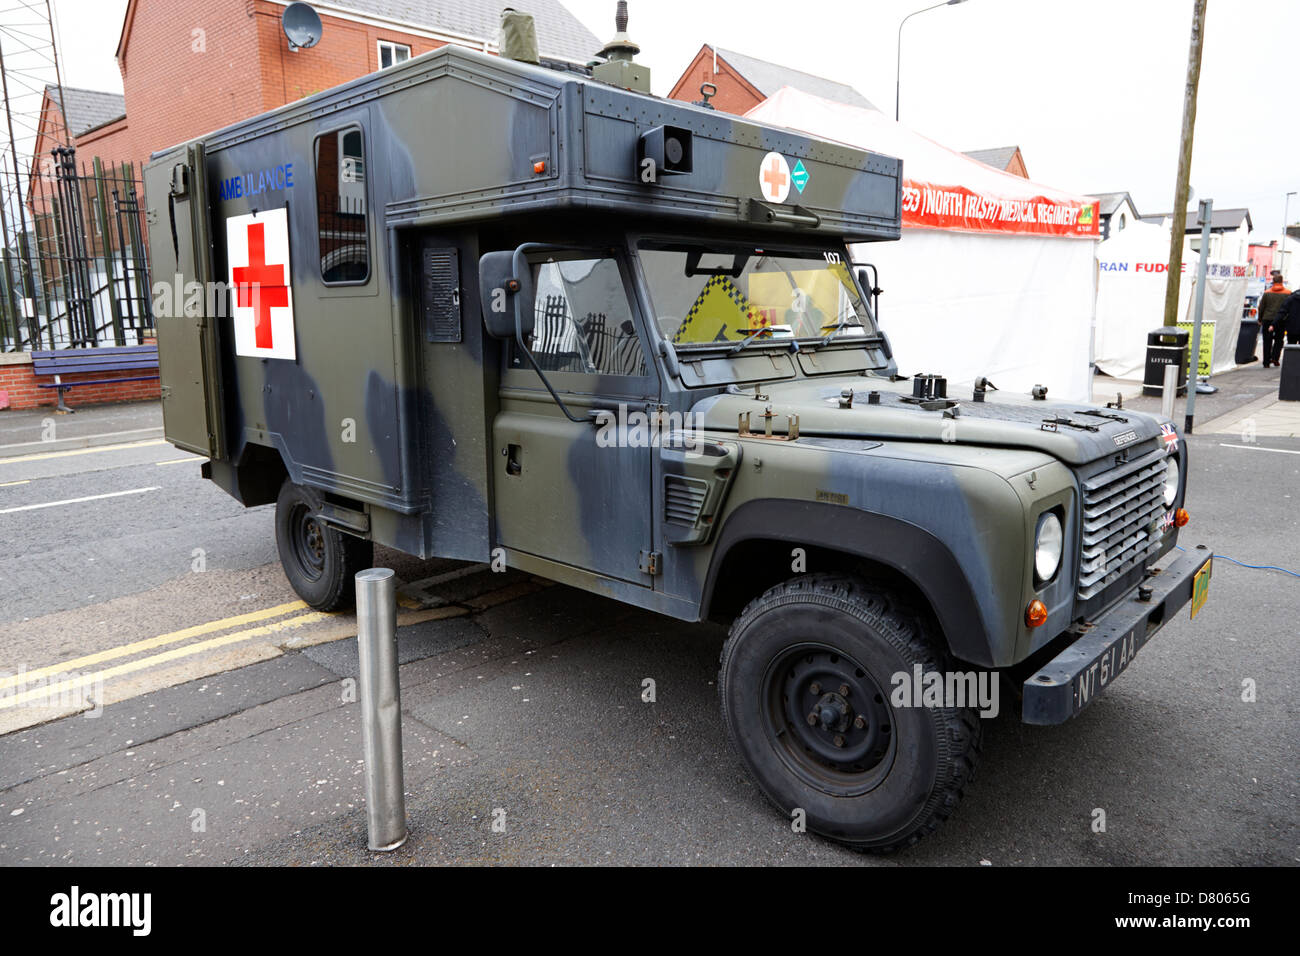 land rover battlefield ambulance at british army medical regiment recruiting stand at an outdoor event Stock Photo